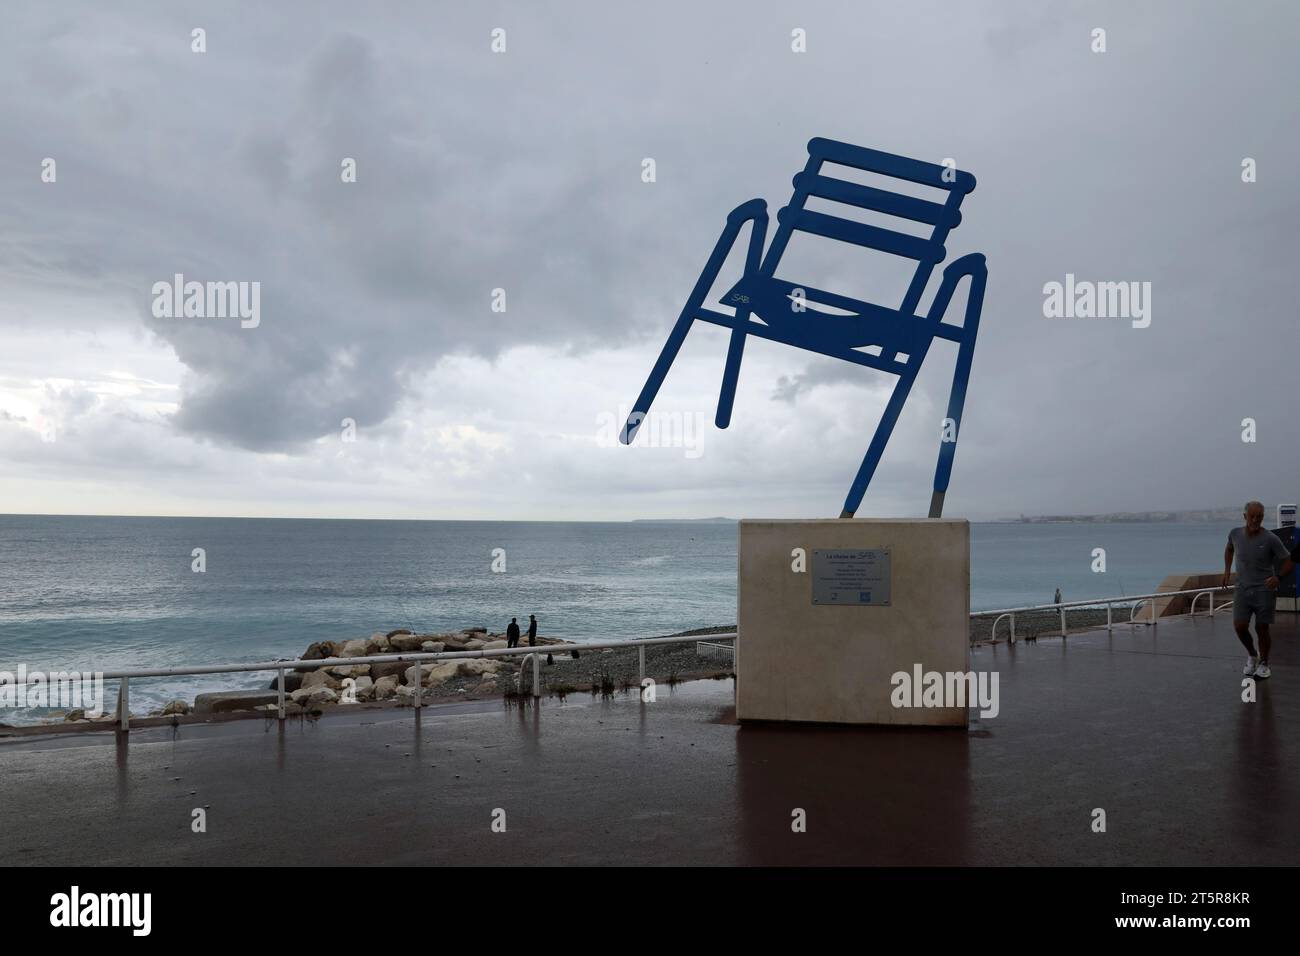 The Blue Chair by Sabine Geraudie at a cloudy Nice in the South of France Stock Photo